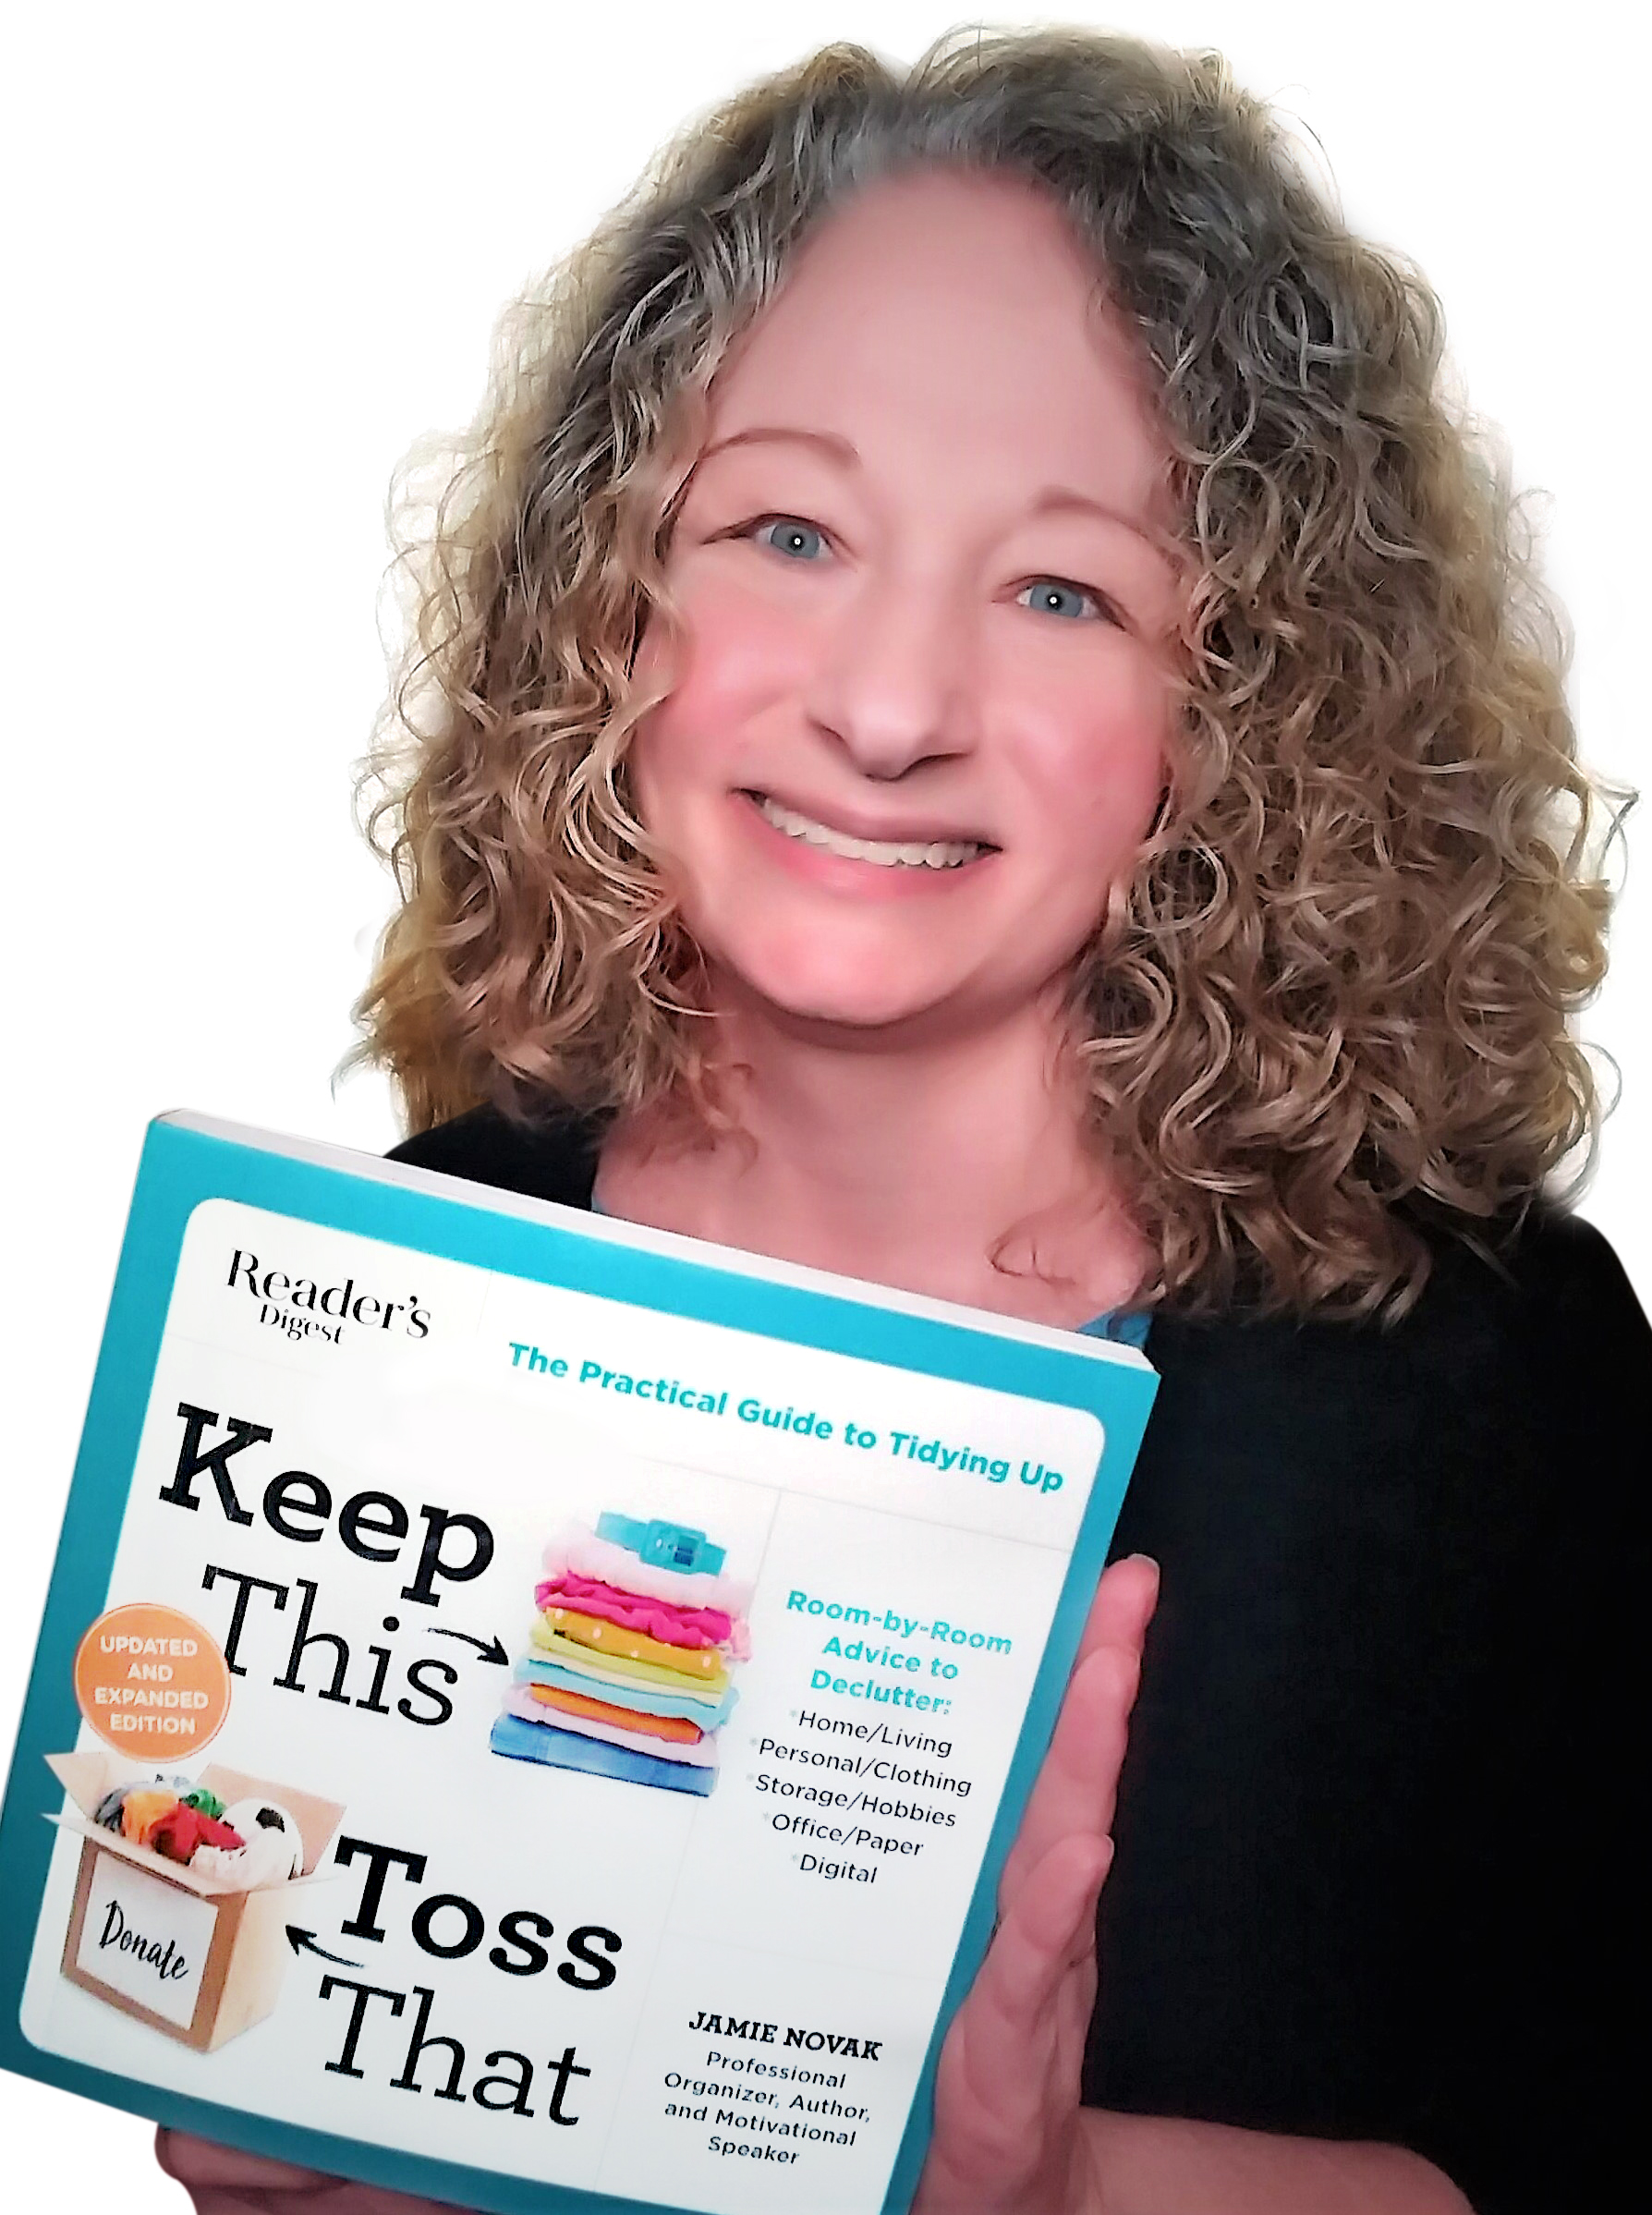 Jamie Novak with her book Keep This, Toss That